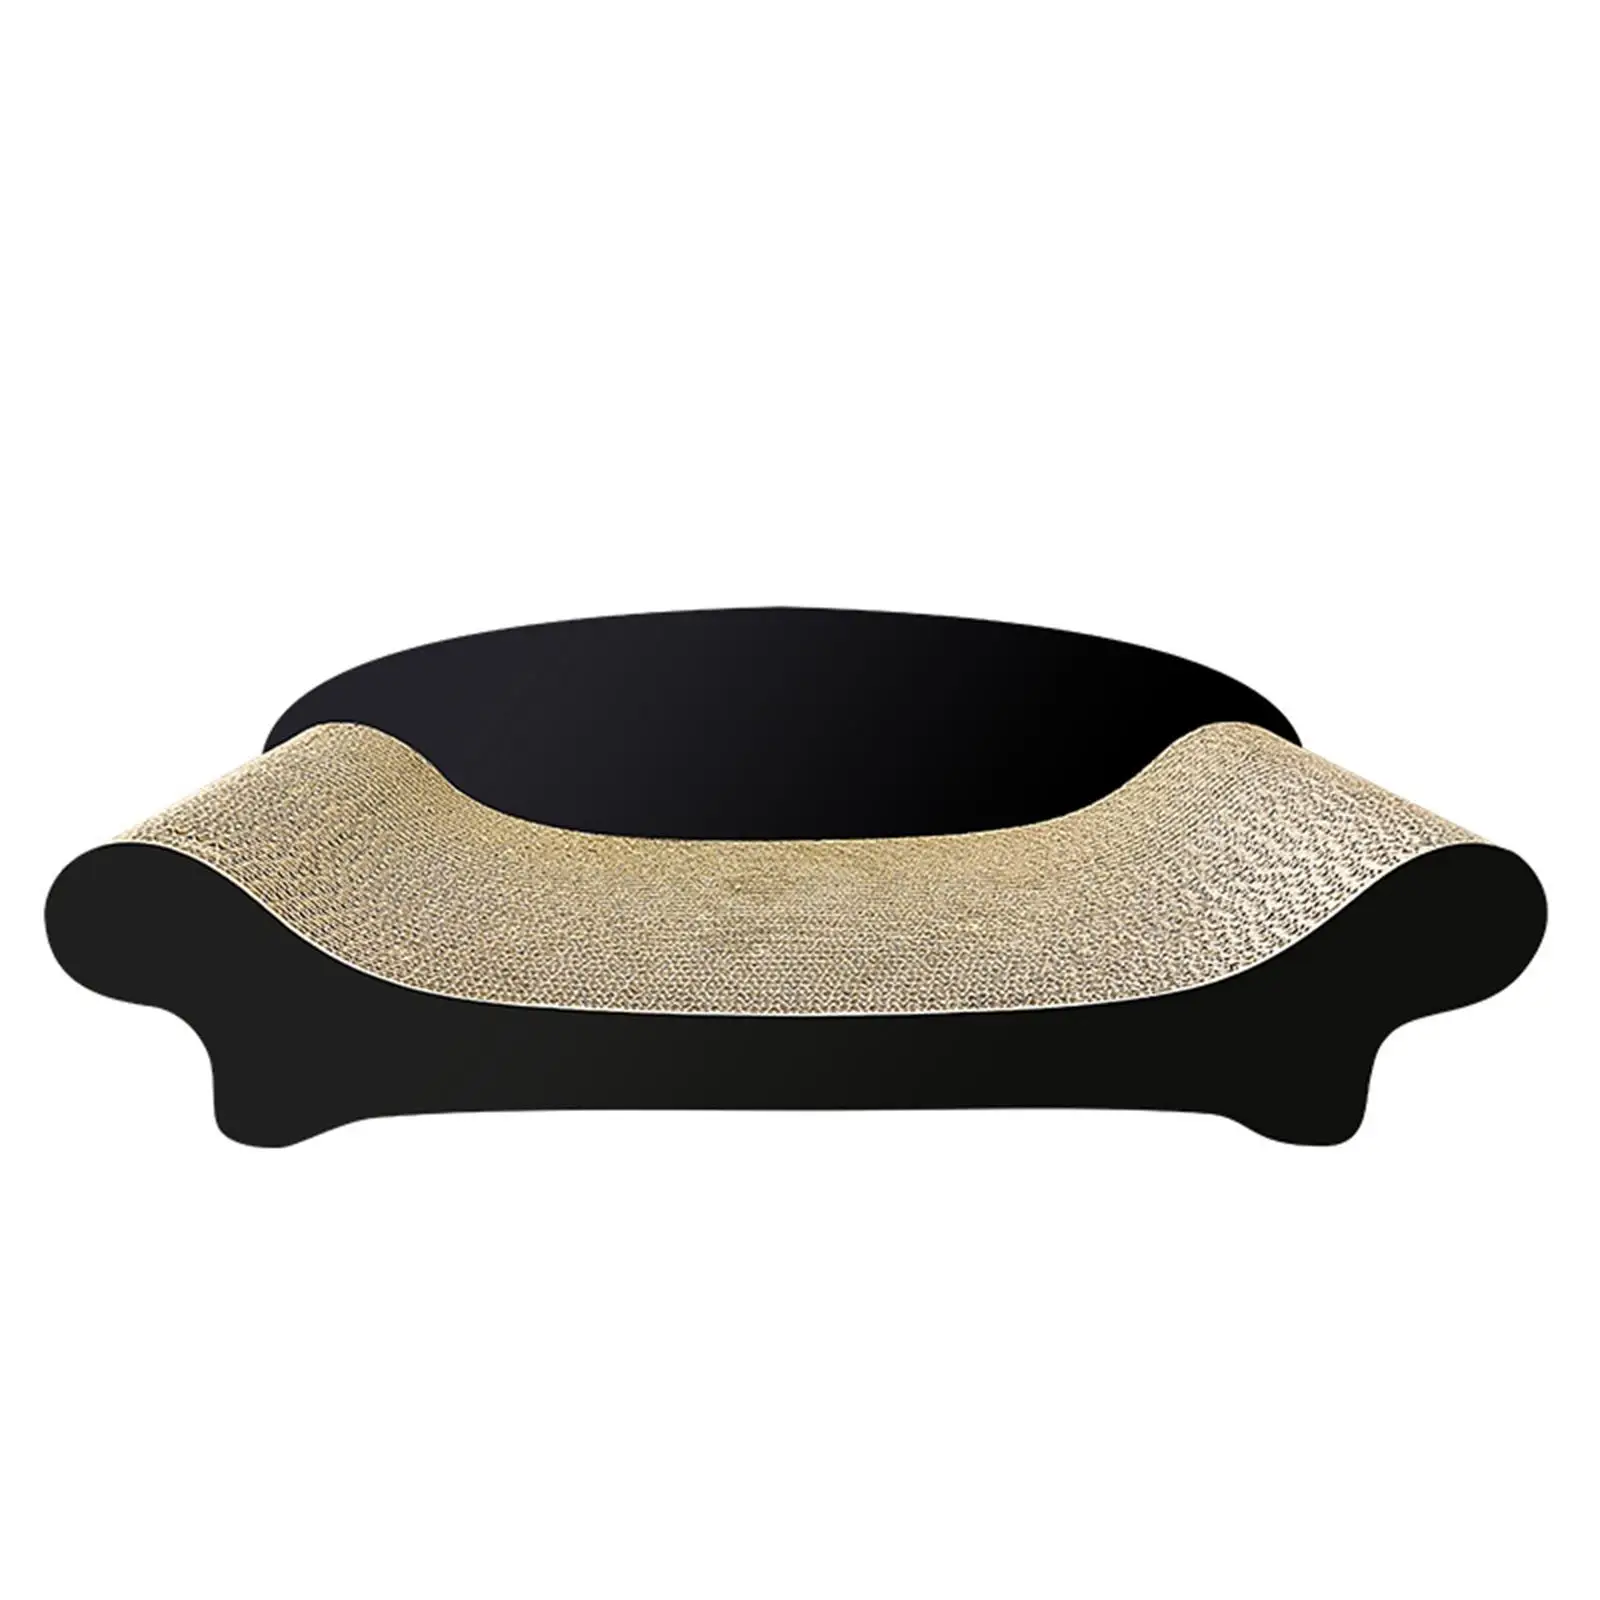 Cat Scratcher Cardboard Lounge Bed, Cat post for scratching, Durable Board Pads Prevents Furniture Damage